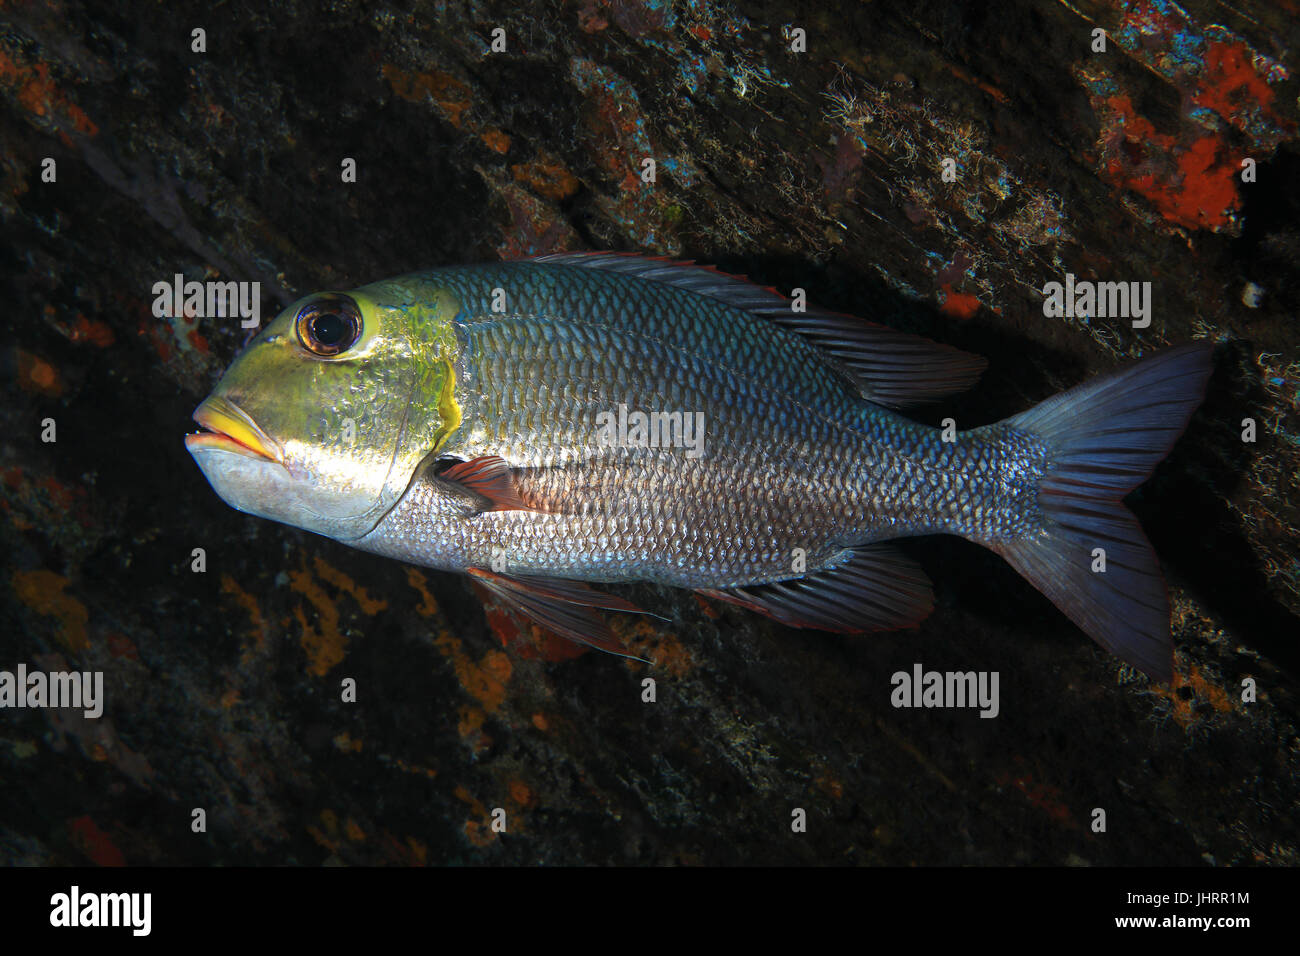 Humpnose big-eye bream (Monotaxis grandoculis) underwater in the tropical indian ocean Stock Photo